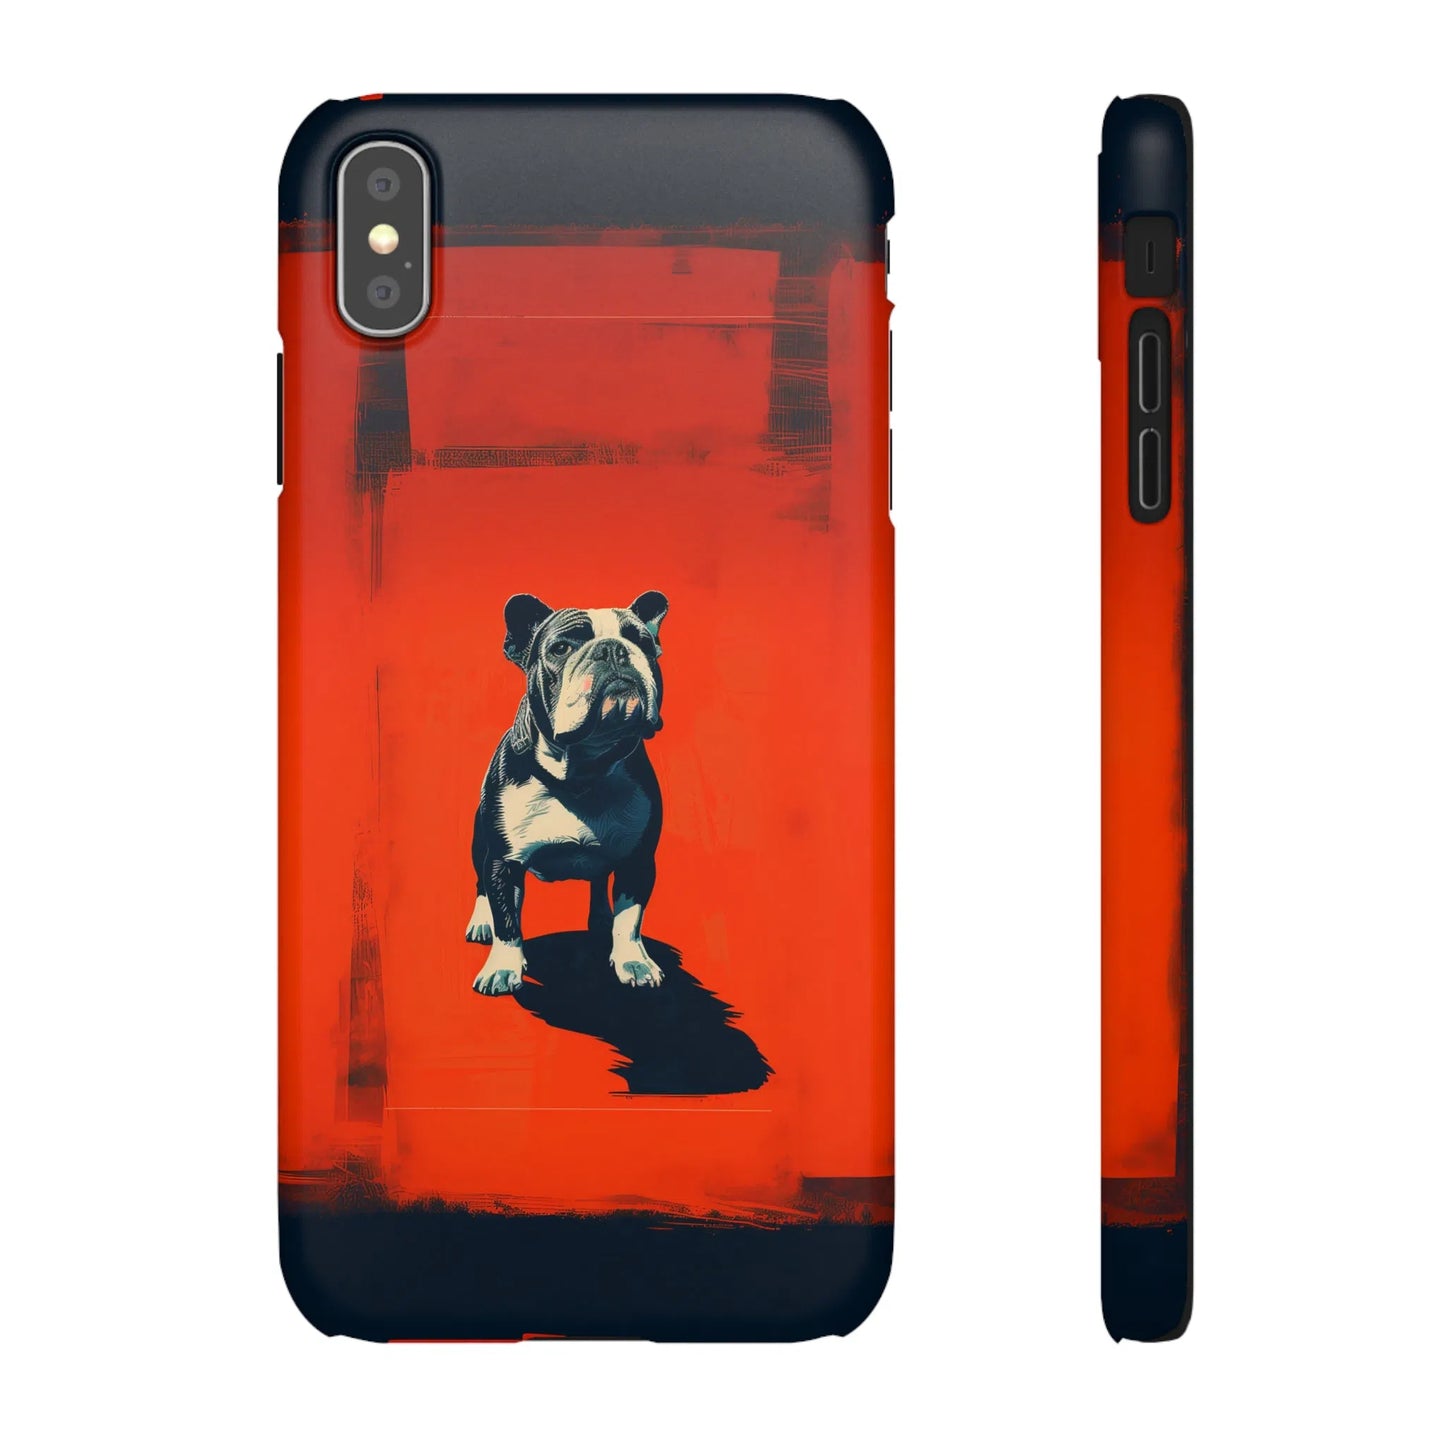 Canine Cool: The Bulldog Statement | Snap Case